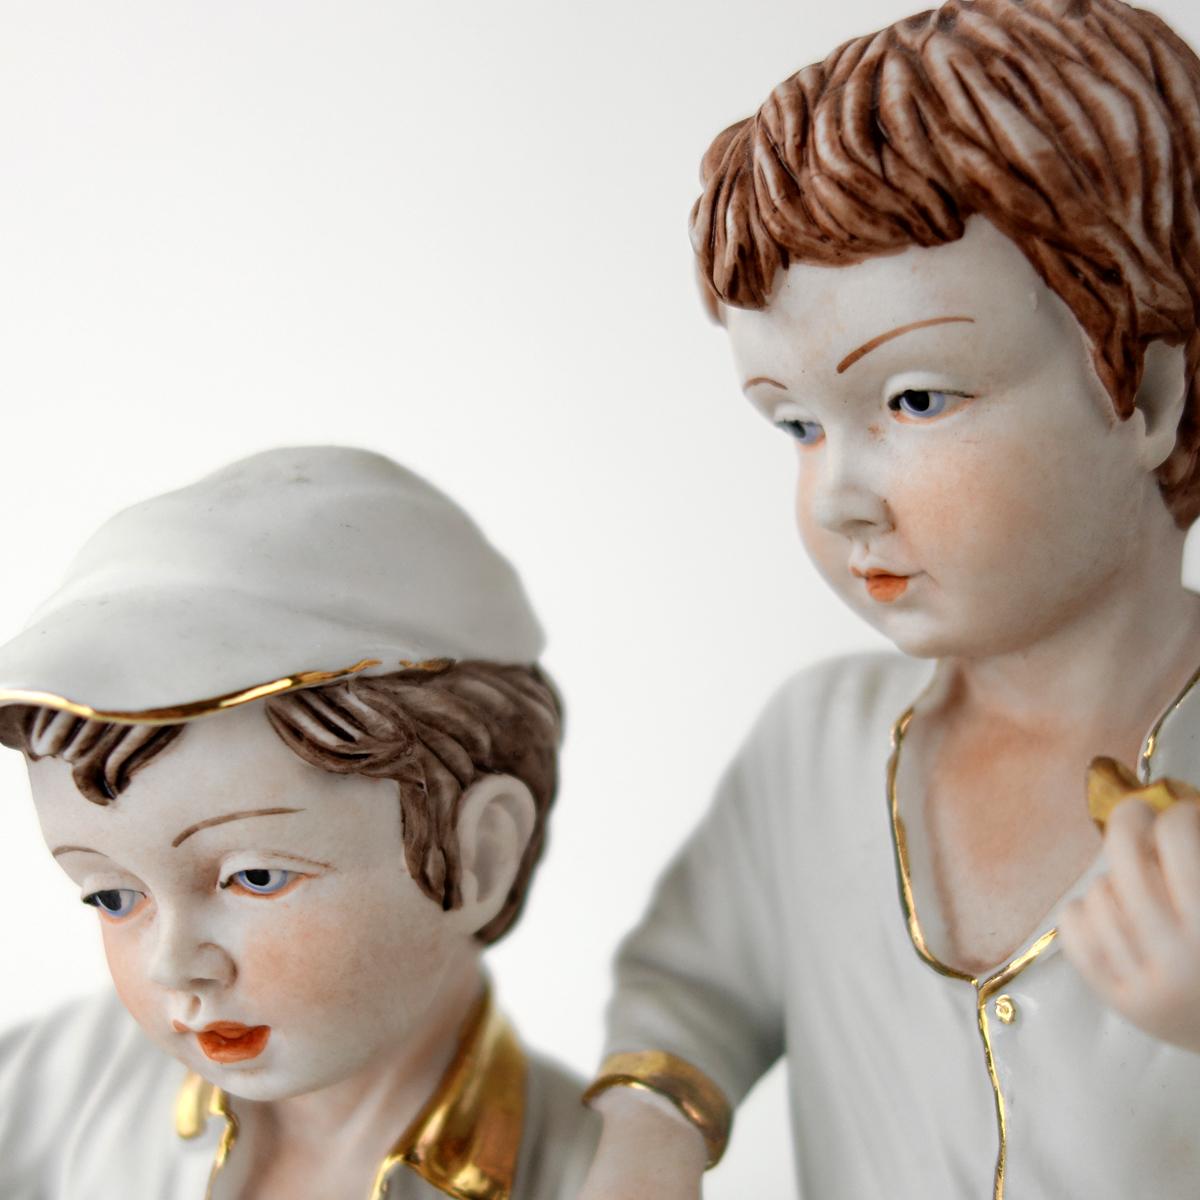 Biscuit Porcelain Statuette of Two Boys Eating a Melon with Gold-Colored Details For Sale 3